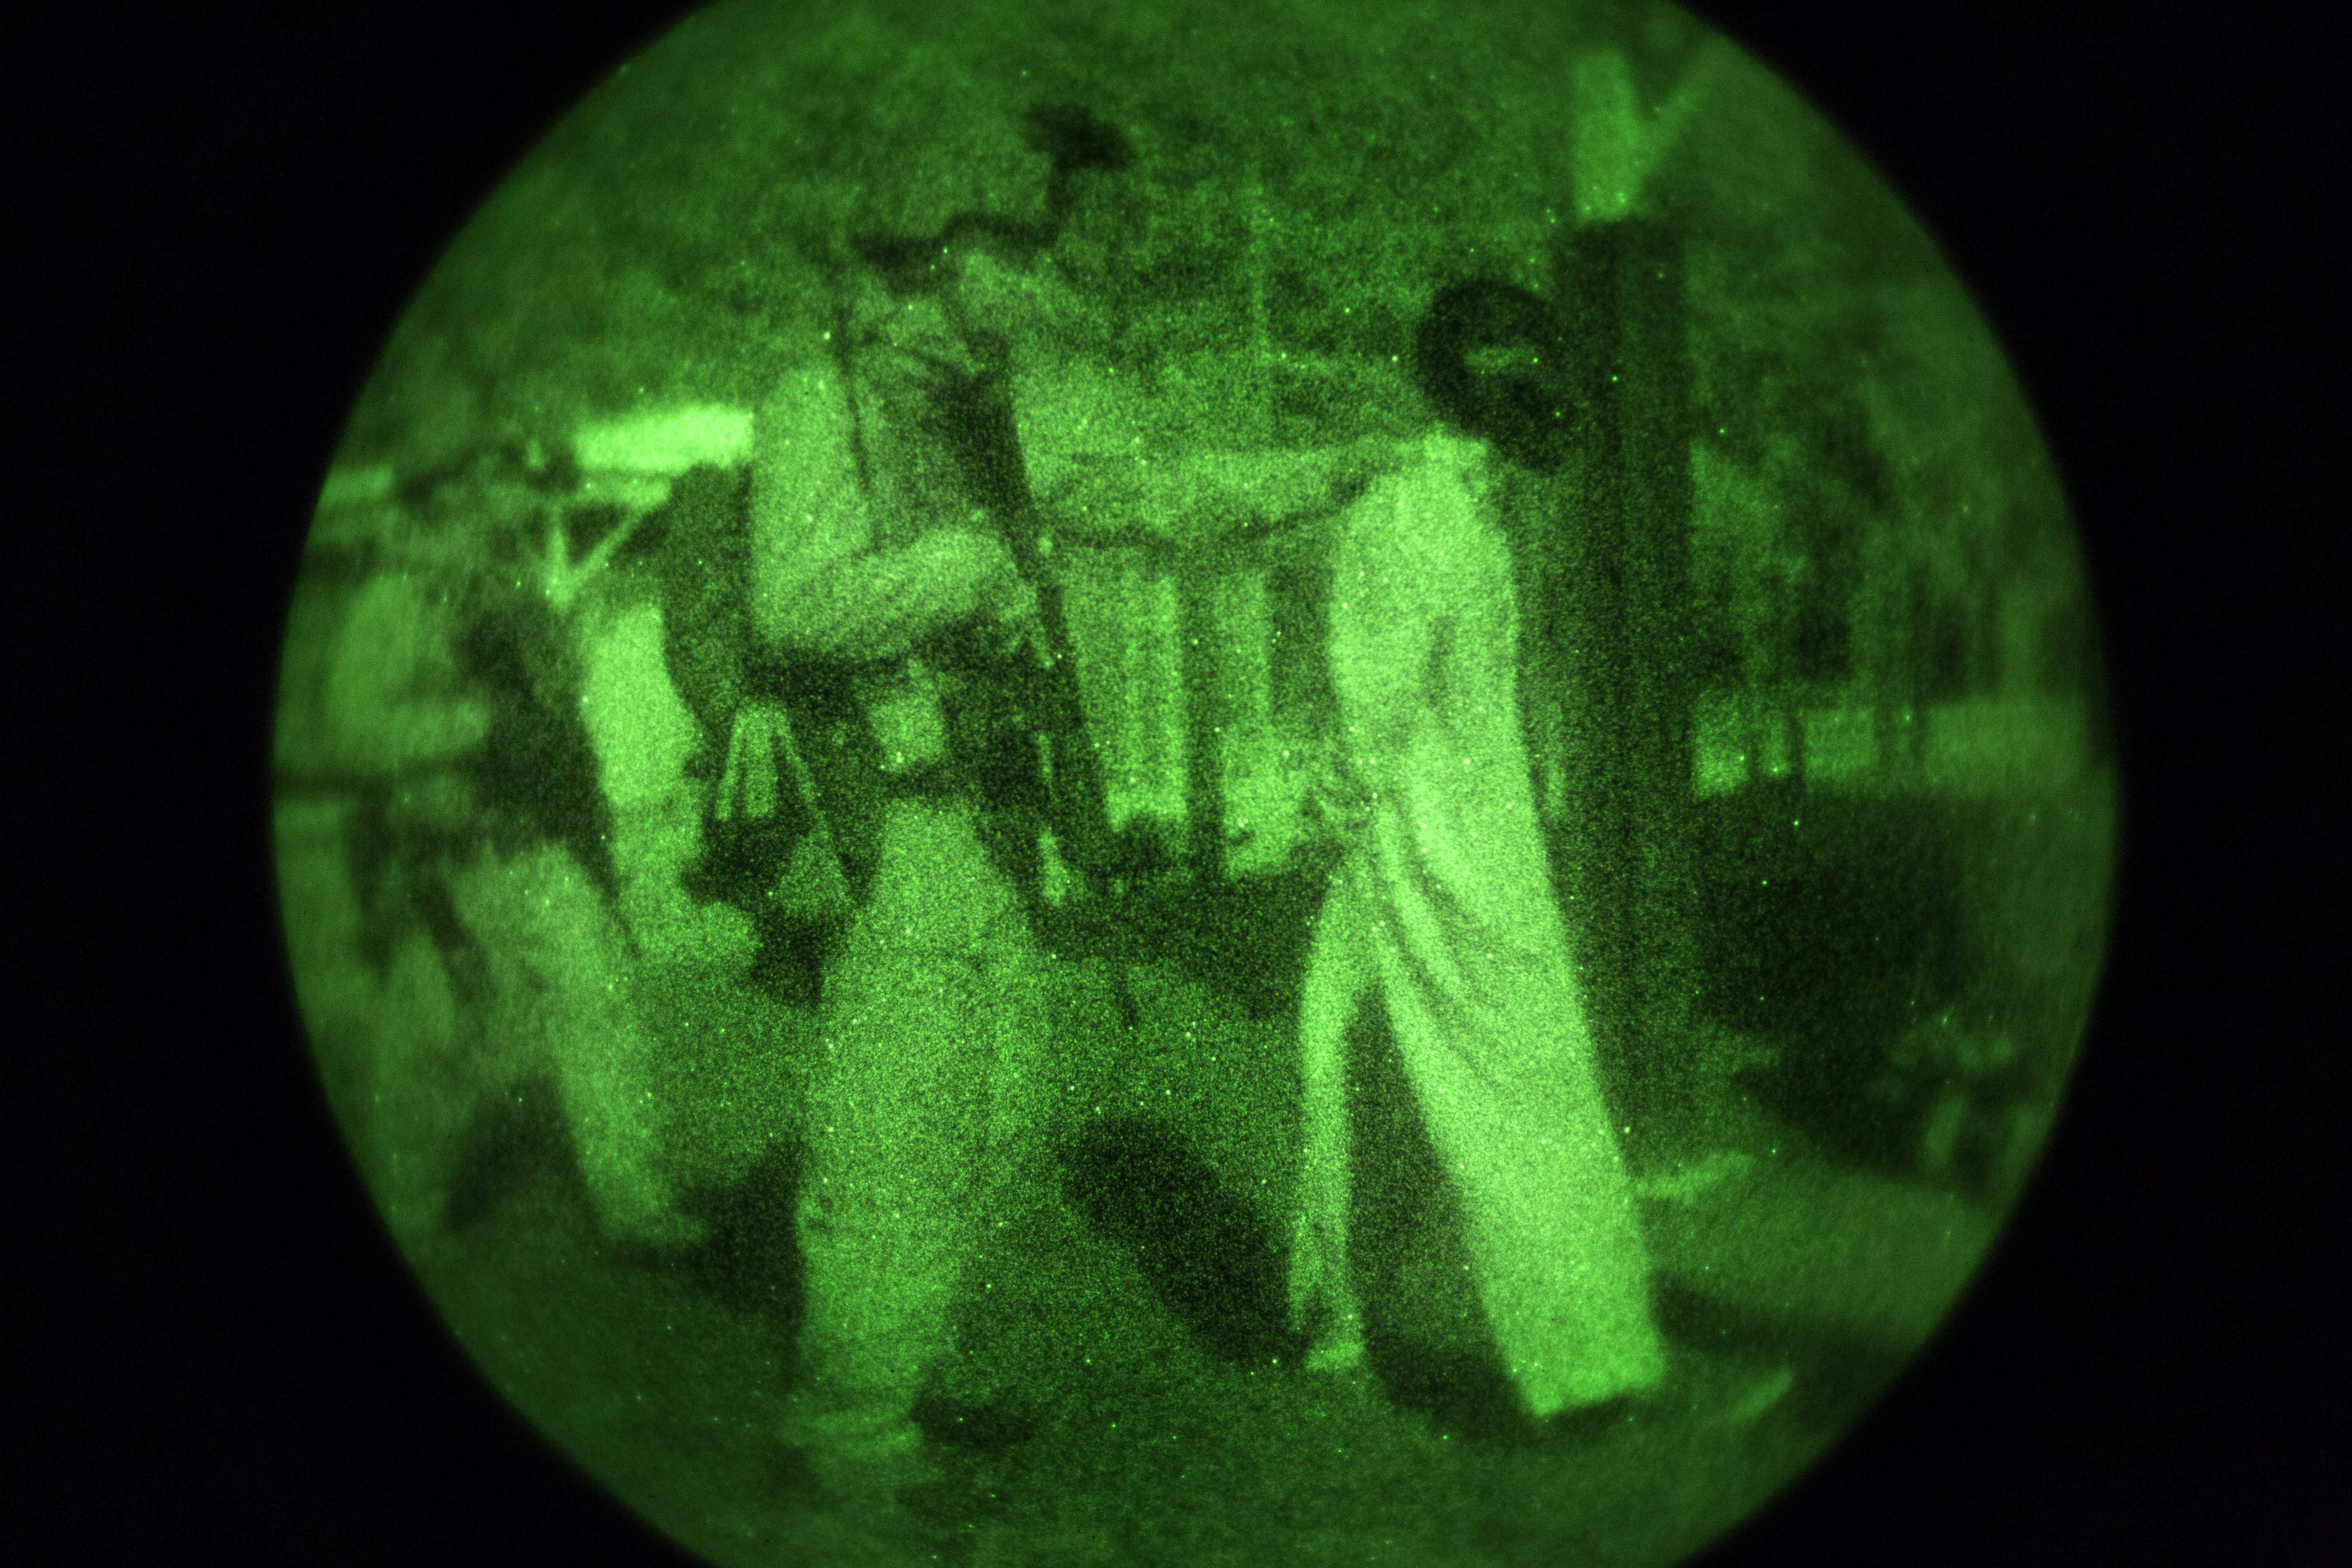 Complete Night Vision Devices and Units